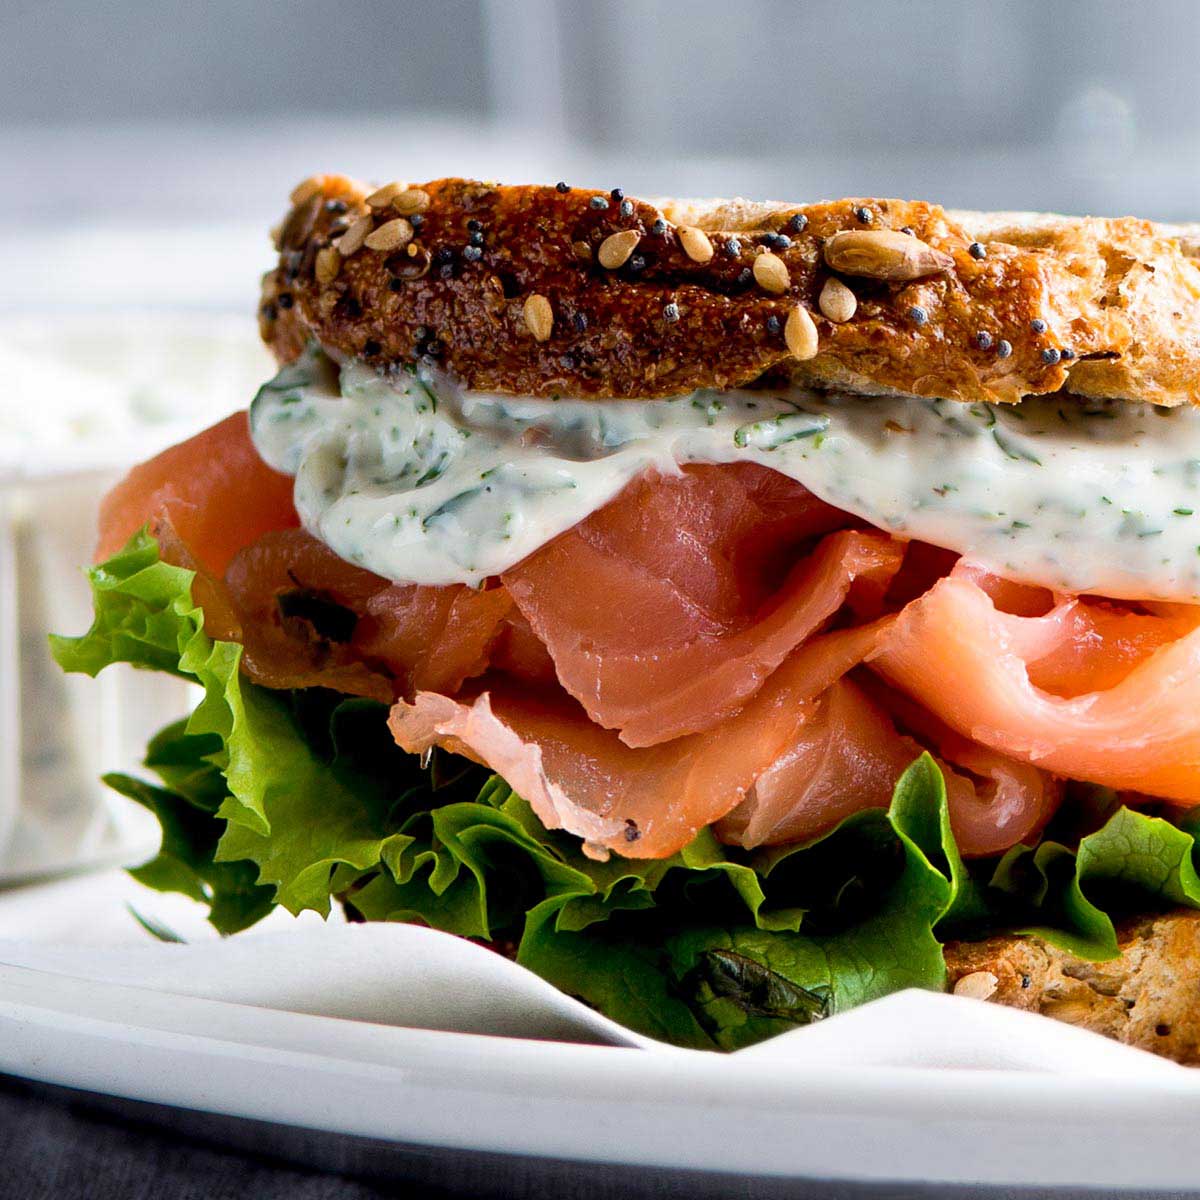 Smoked salmon panini with lettuce and dill mayonnaise.